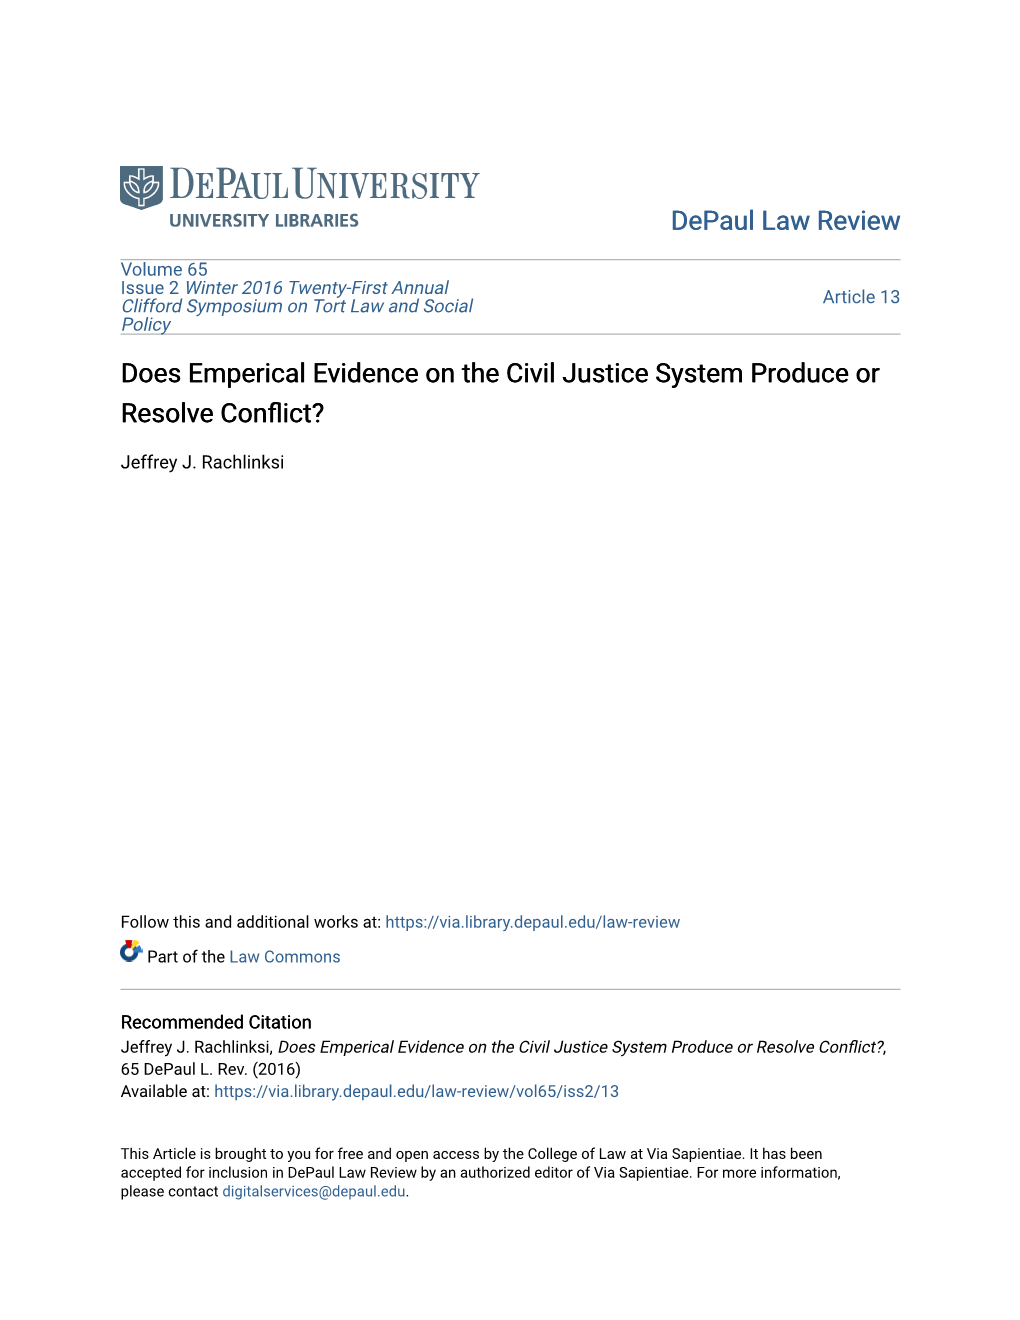 Does Emperical Evidence on the Civil Justice System Produce Or Resolve Conflict?